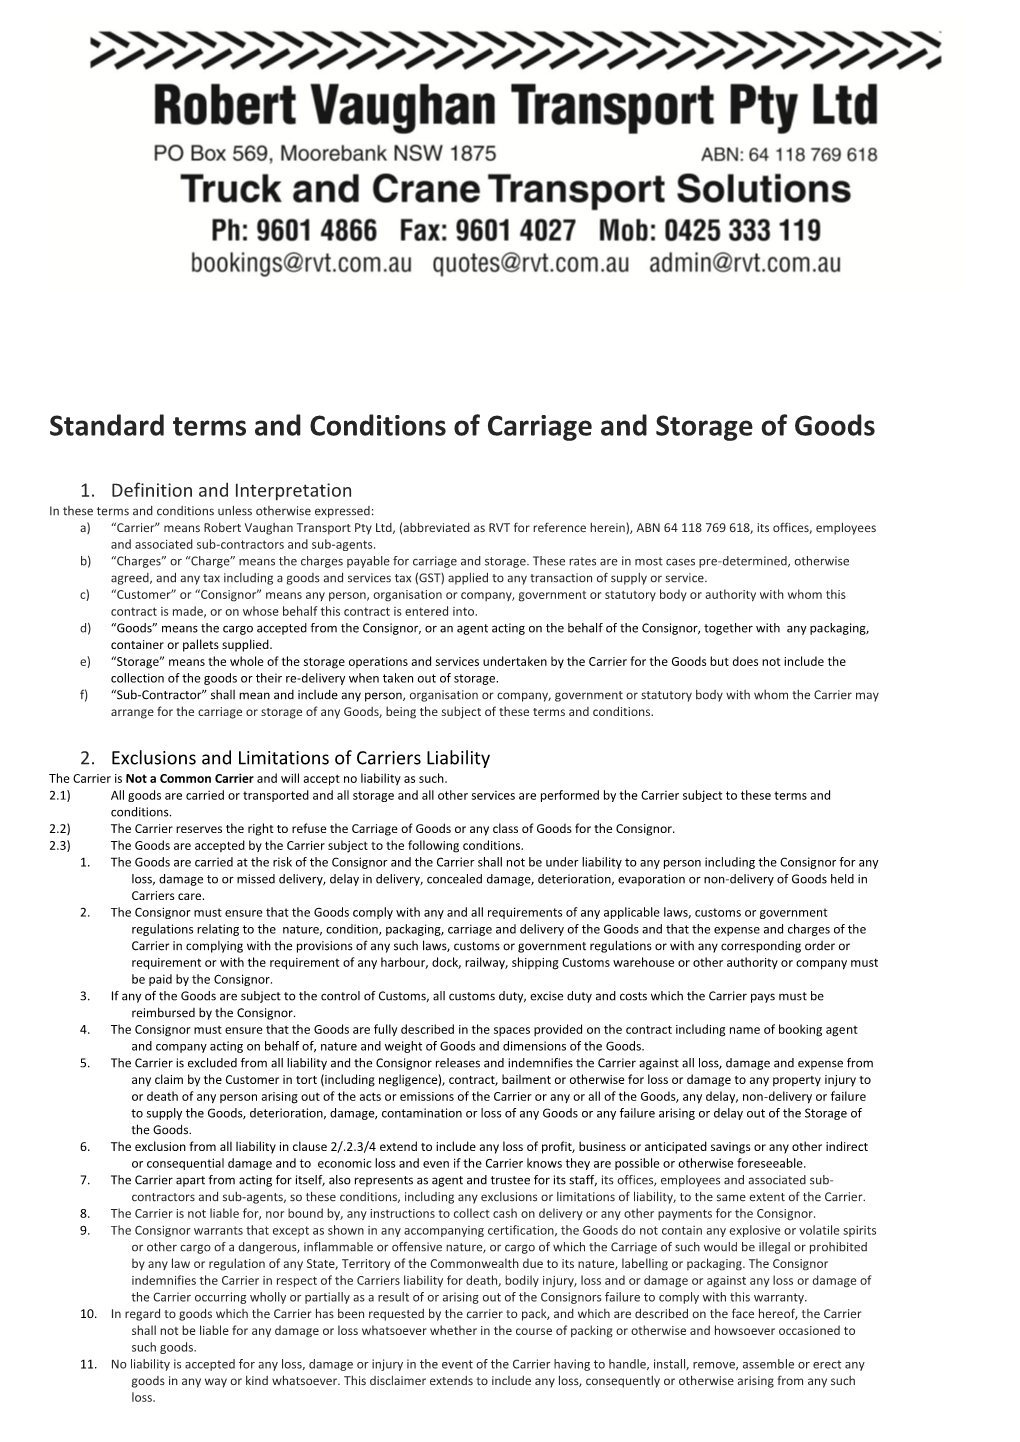 Standard Terms and Conditions of Carriage and Storage of Goods